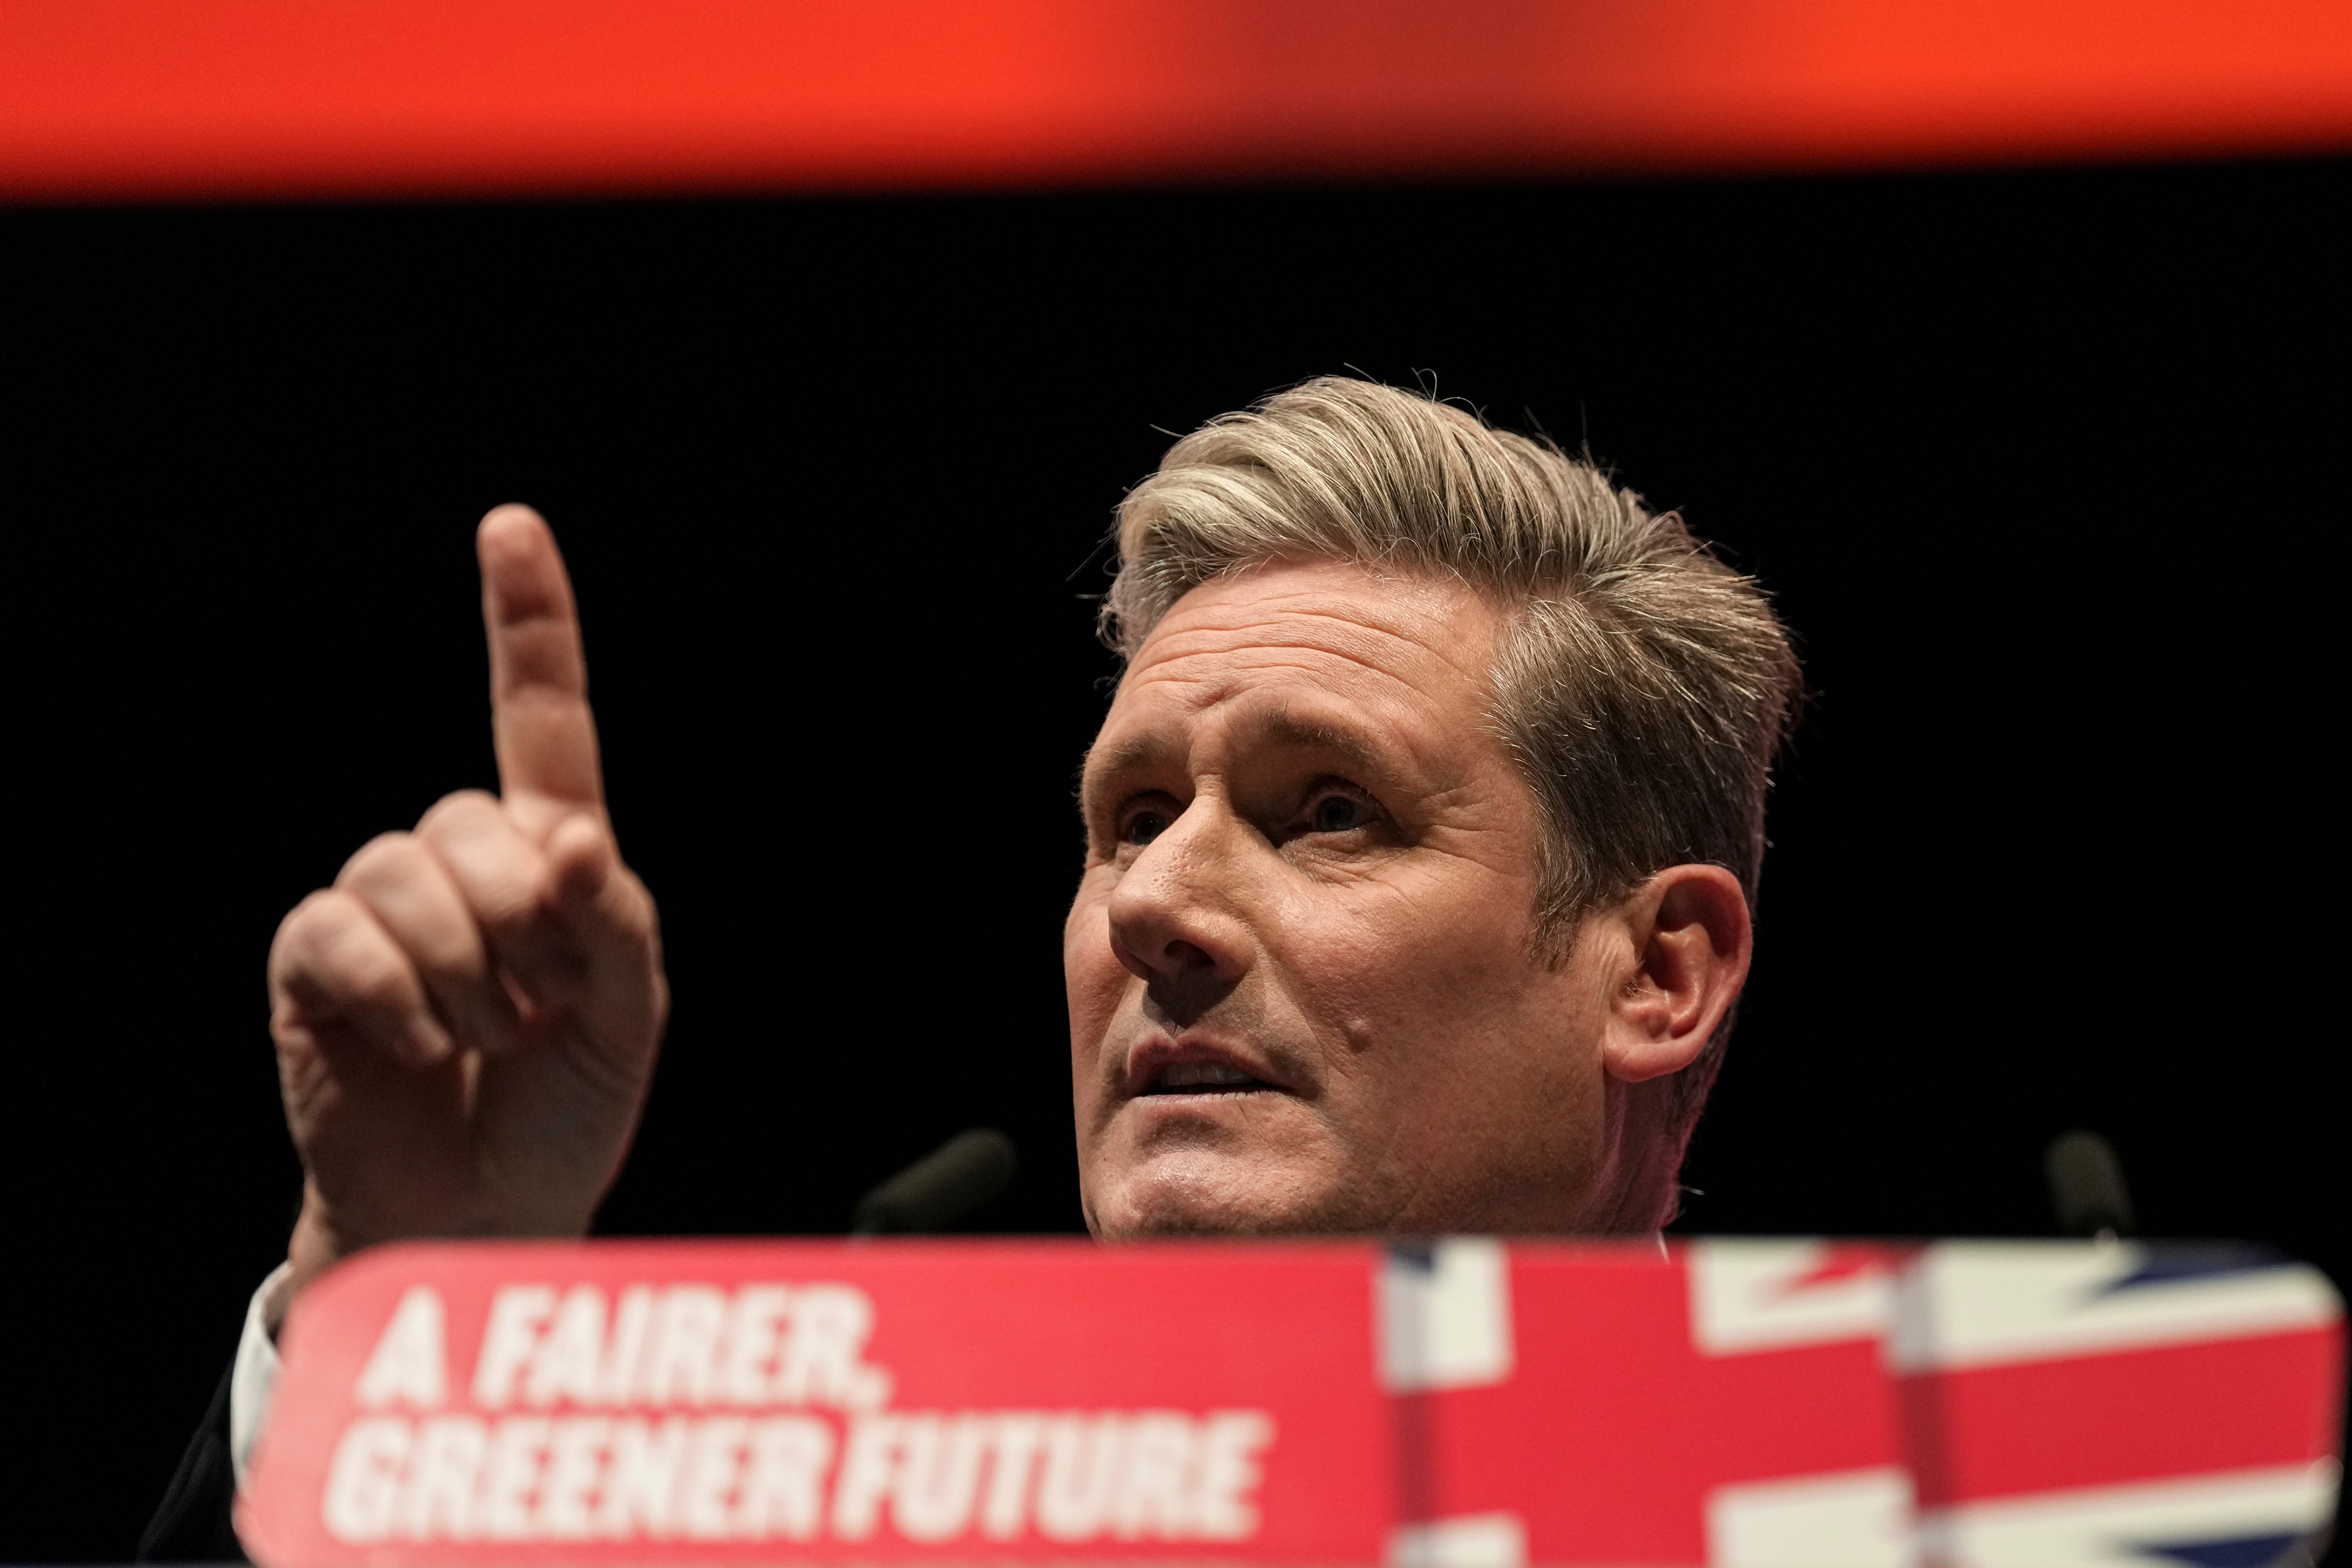 The betting is with Keir Starmer just like the polls